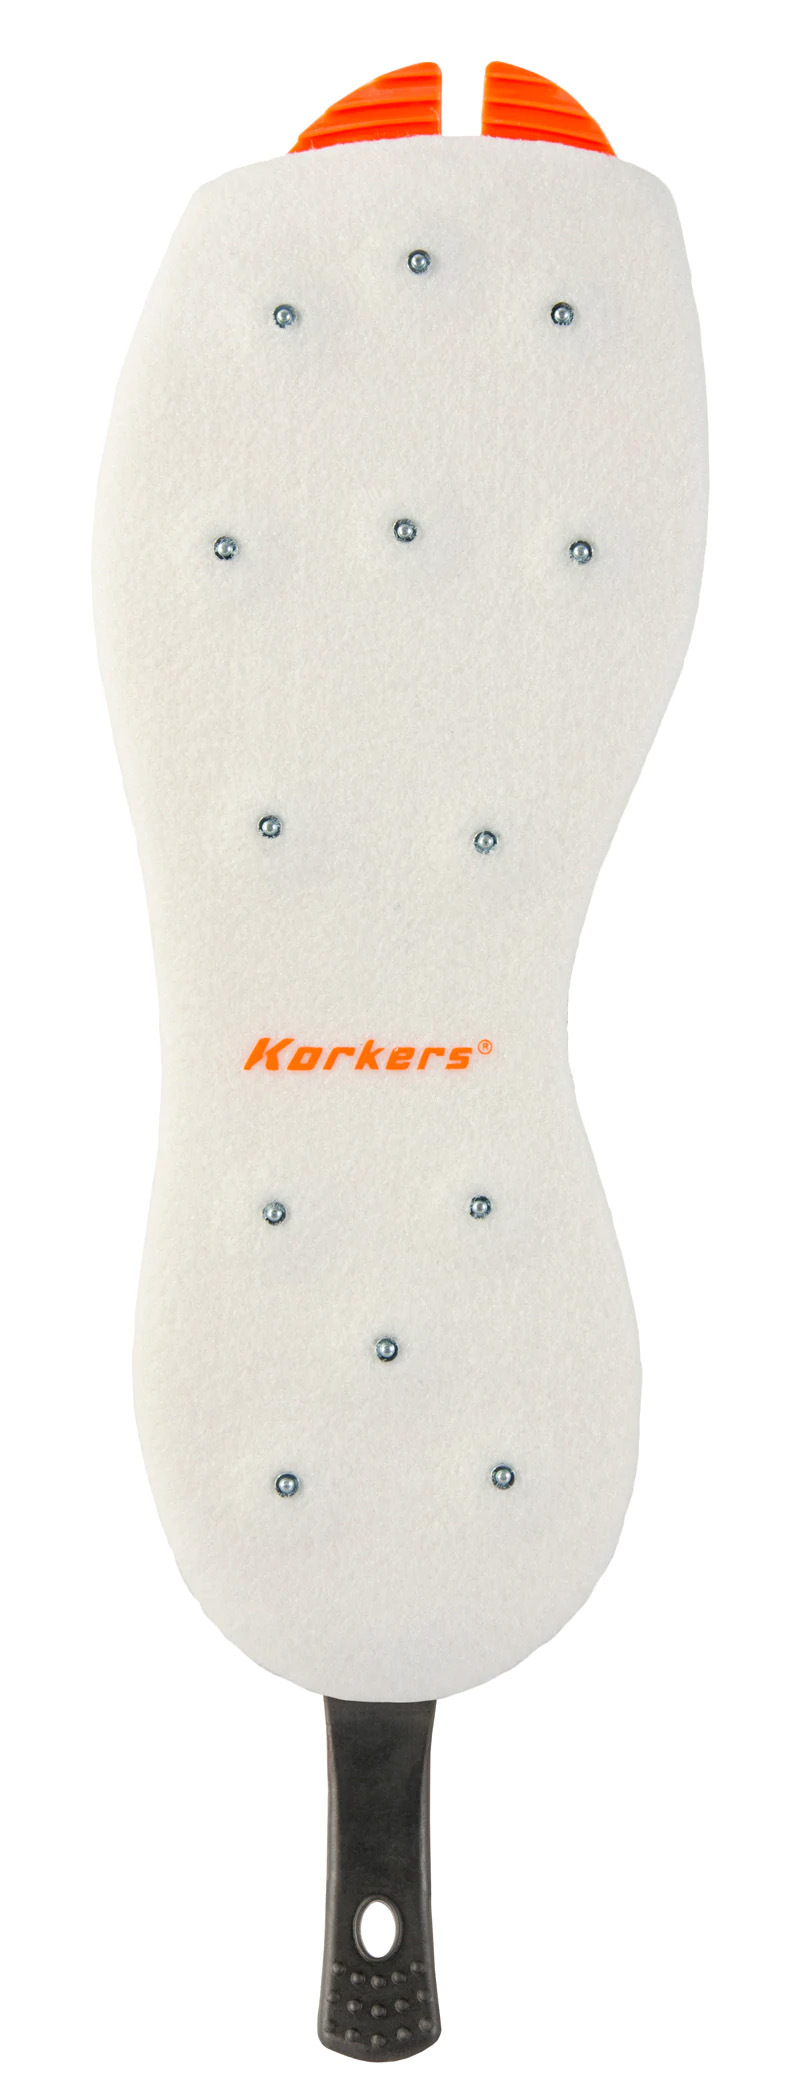 Korkers OmniTrax 3.0 Sole Studded Felt - Click Image to Close